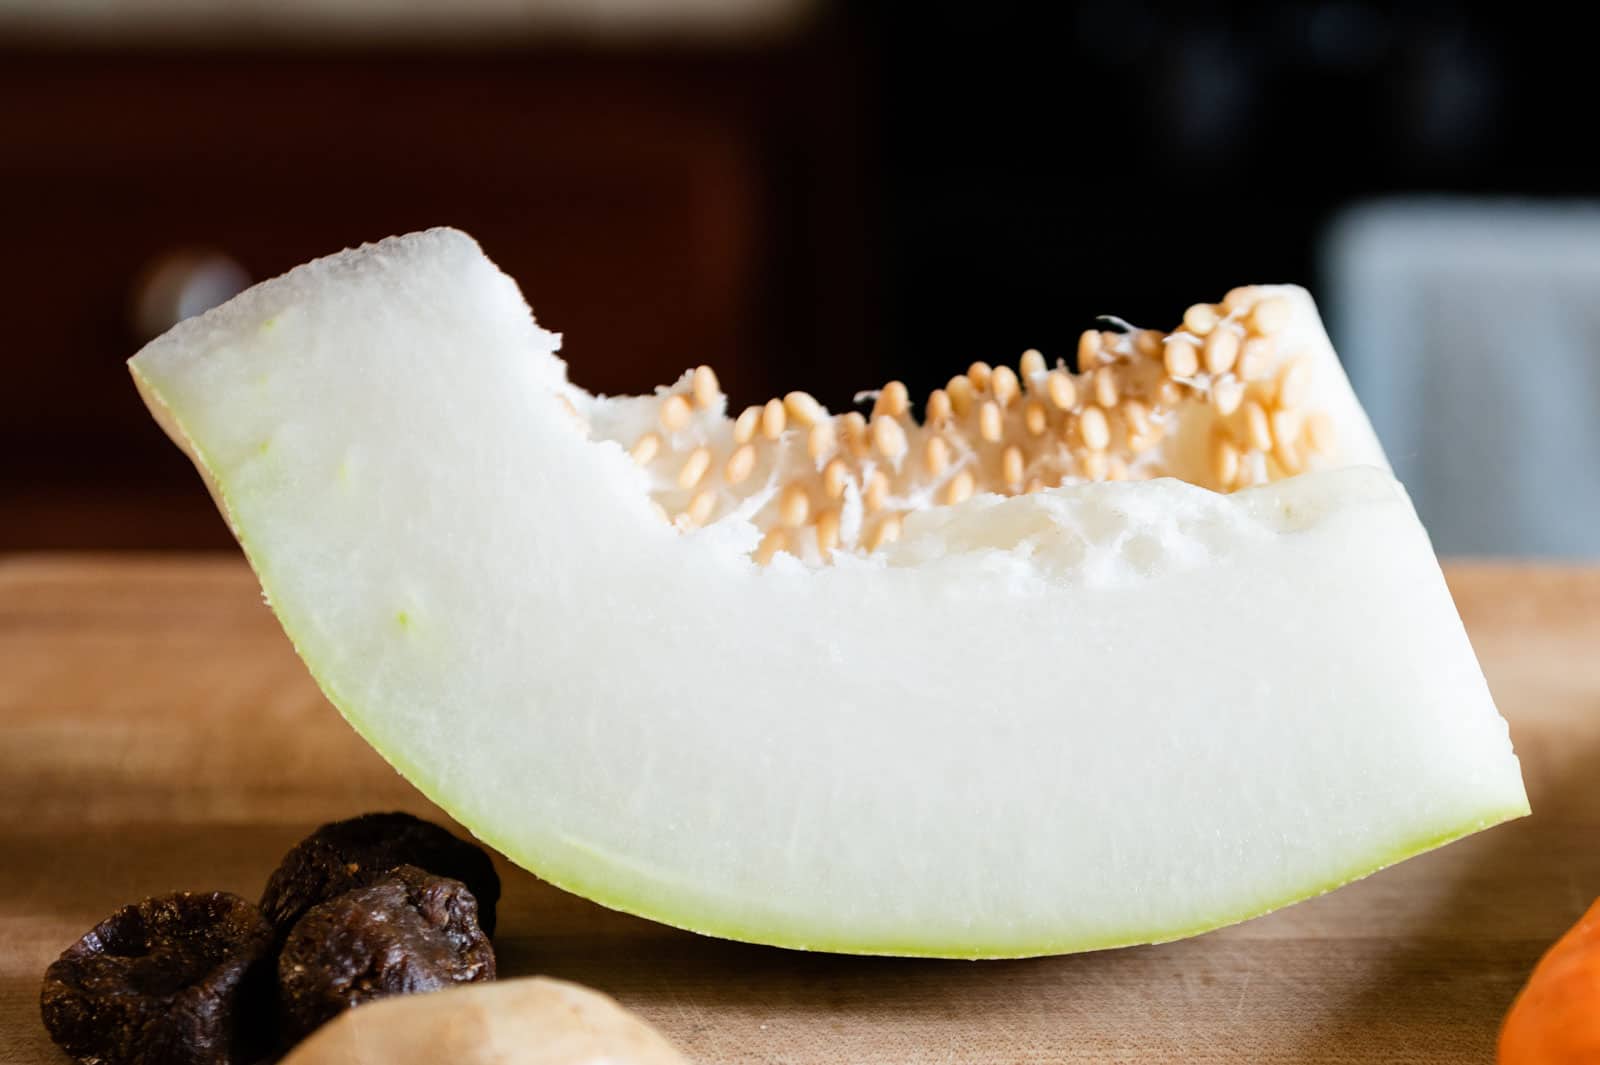 Section of winter melon